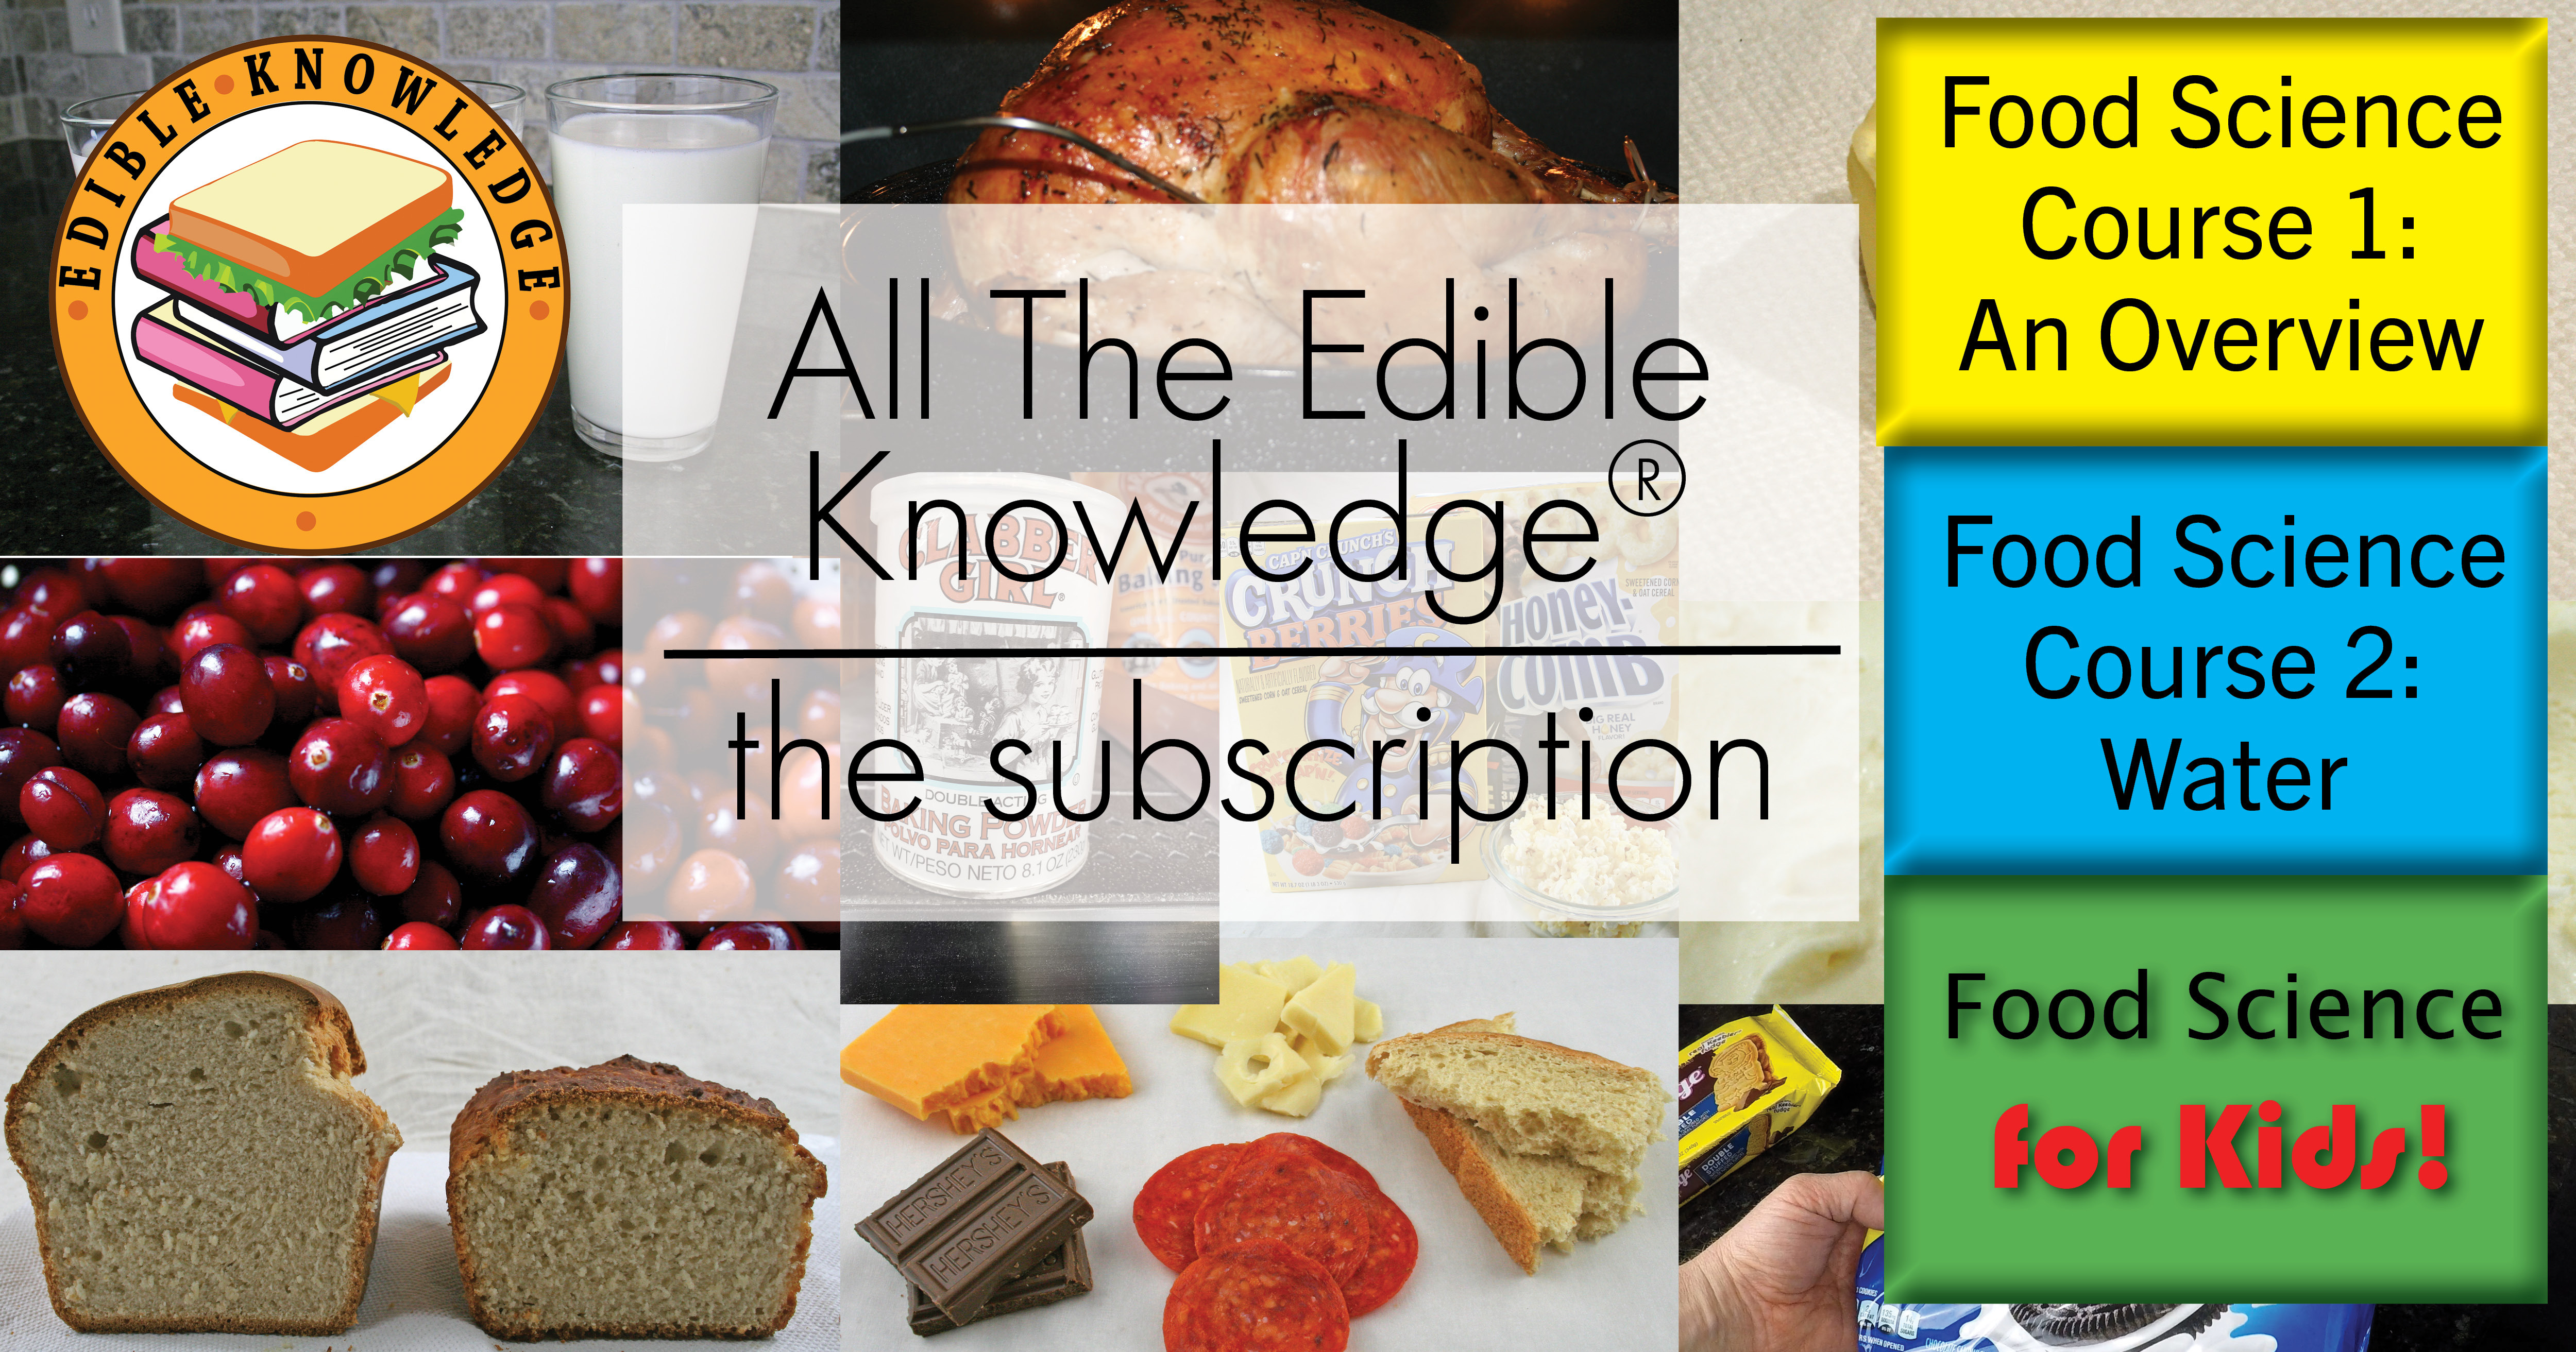 All The Edible Knowledge subscription course image